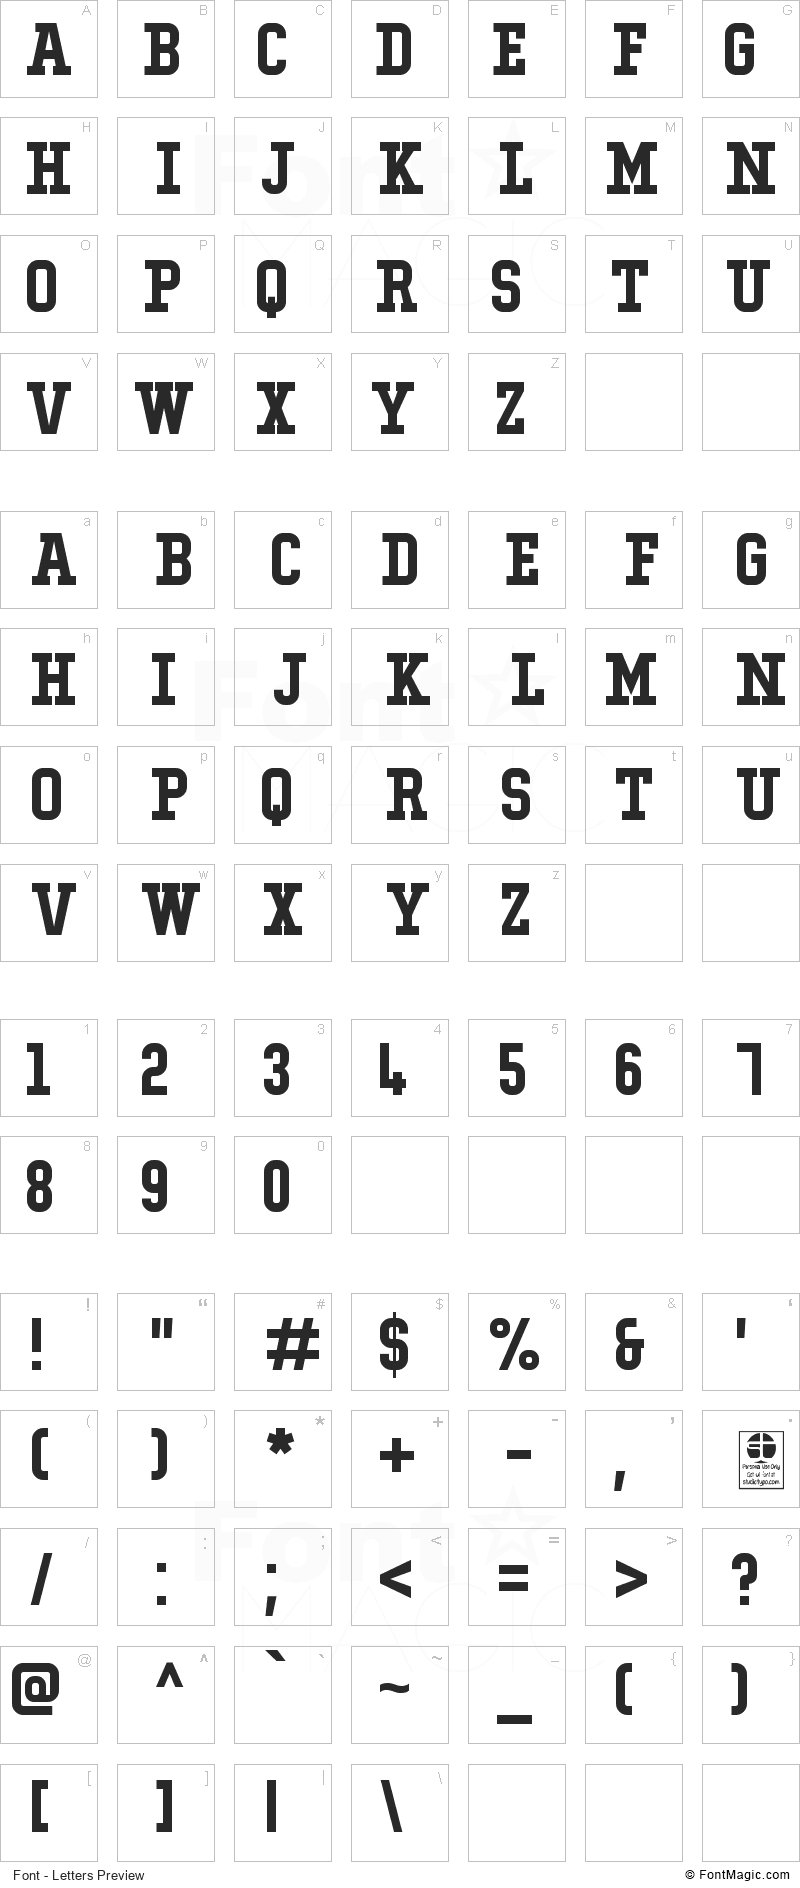 Typo College Font - All Latters Preview Chart